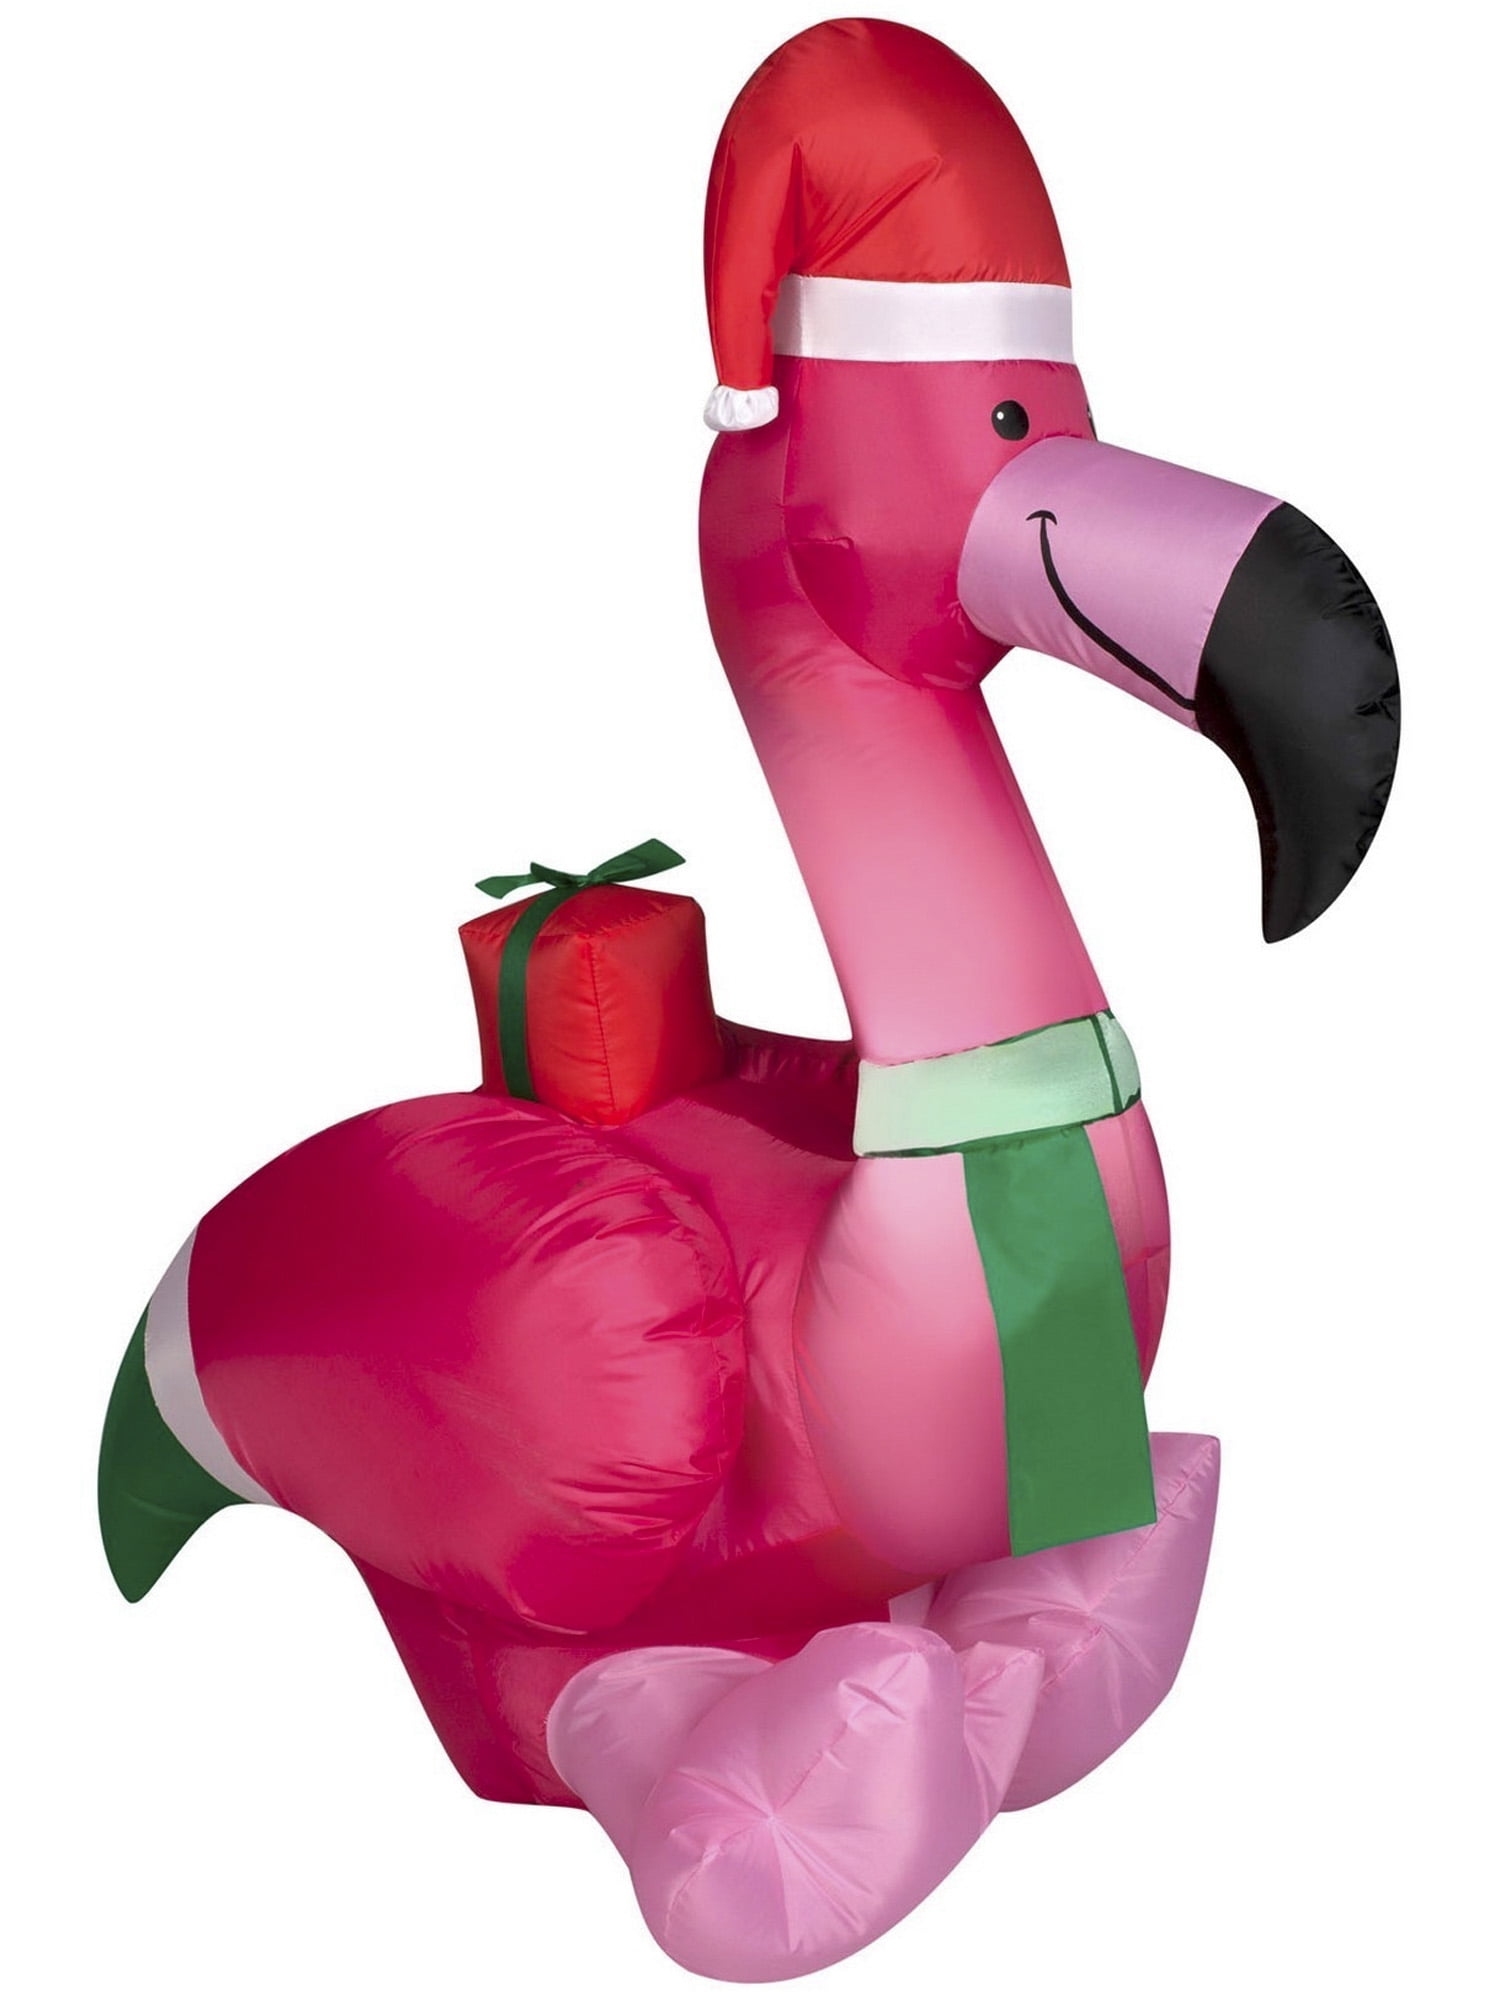 Picture of Gemmy 270166 Airblown Outdoor Flamingo Airblown